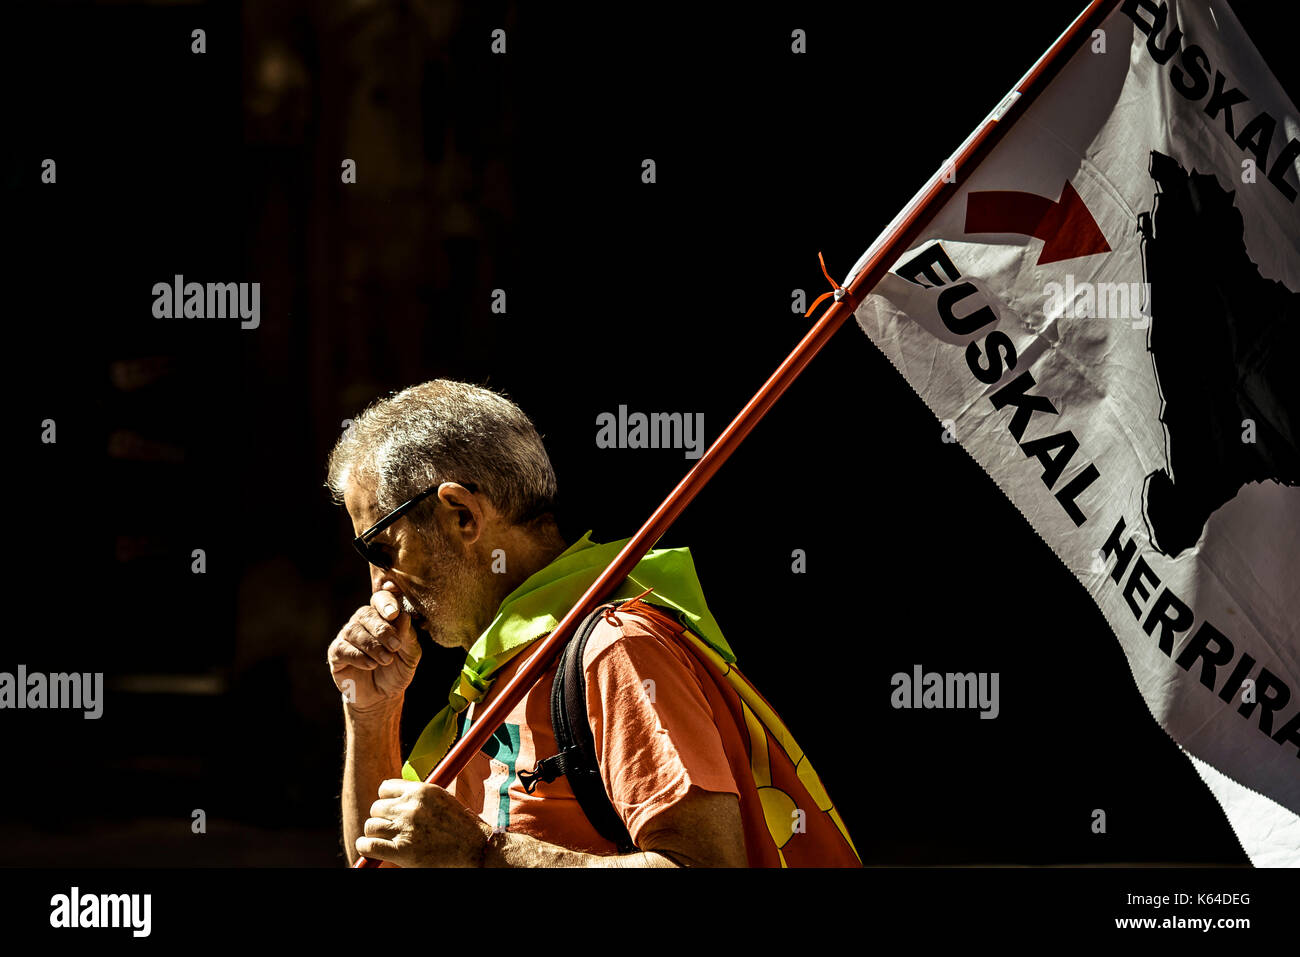 Barcelona, Spain. 11th Sep, 2017. A basque pro-independence activist with his flag is seen on the 'Diada' (Catalan National Day) in Barcelona Credit: Matthias Oesterle/Alamy Live News Stock Photo